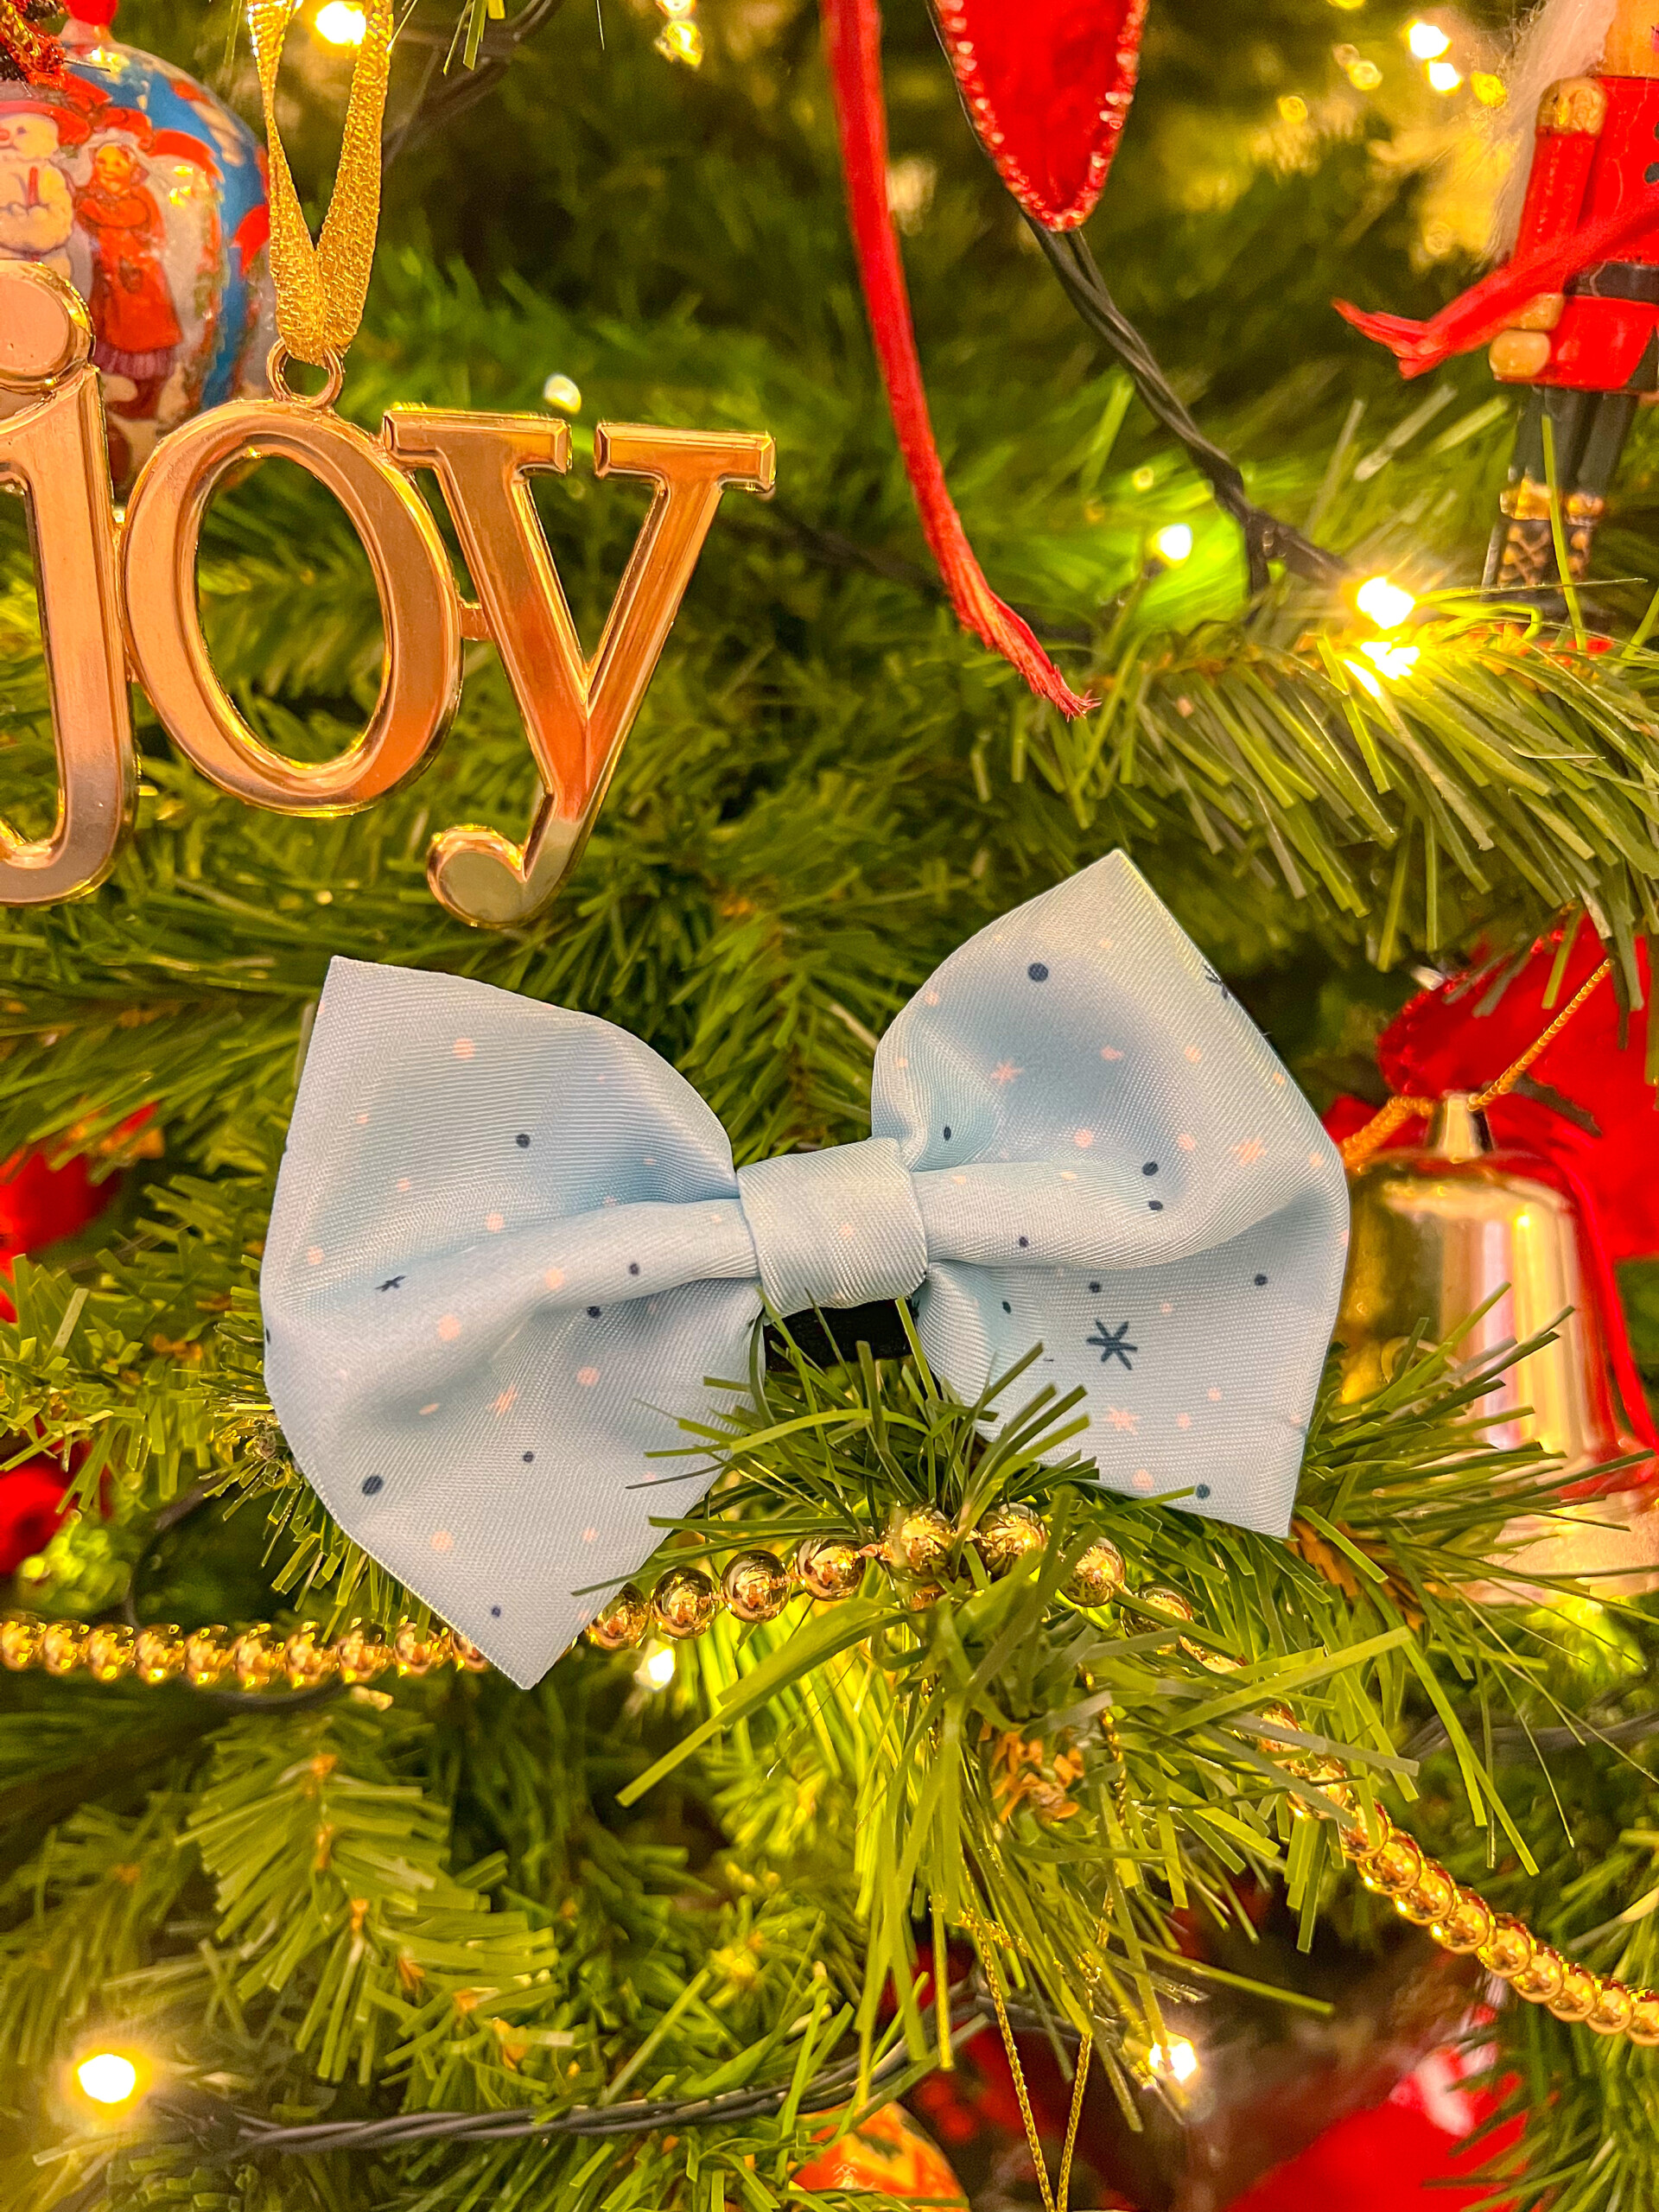 A winter dog bow tie, showing white and blue spots against a pale blue background, placed on a Christmas tree amongst decorations.